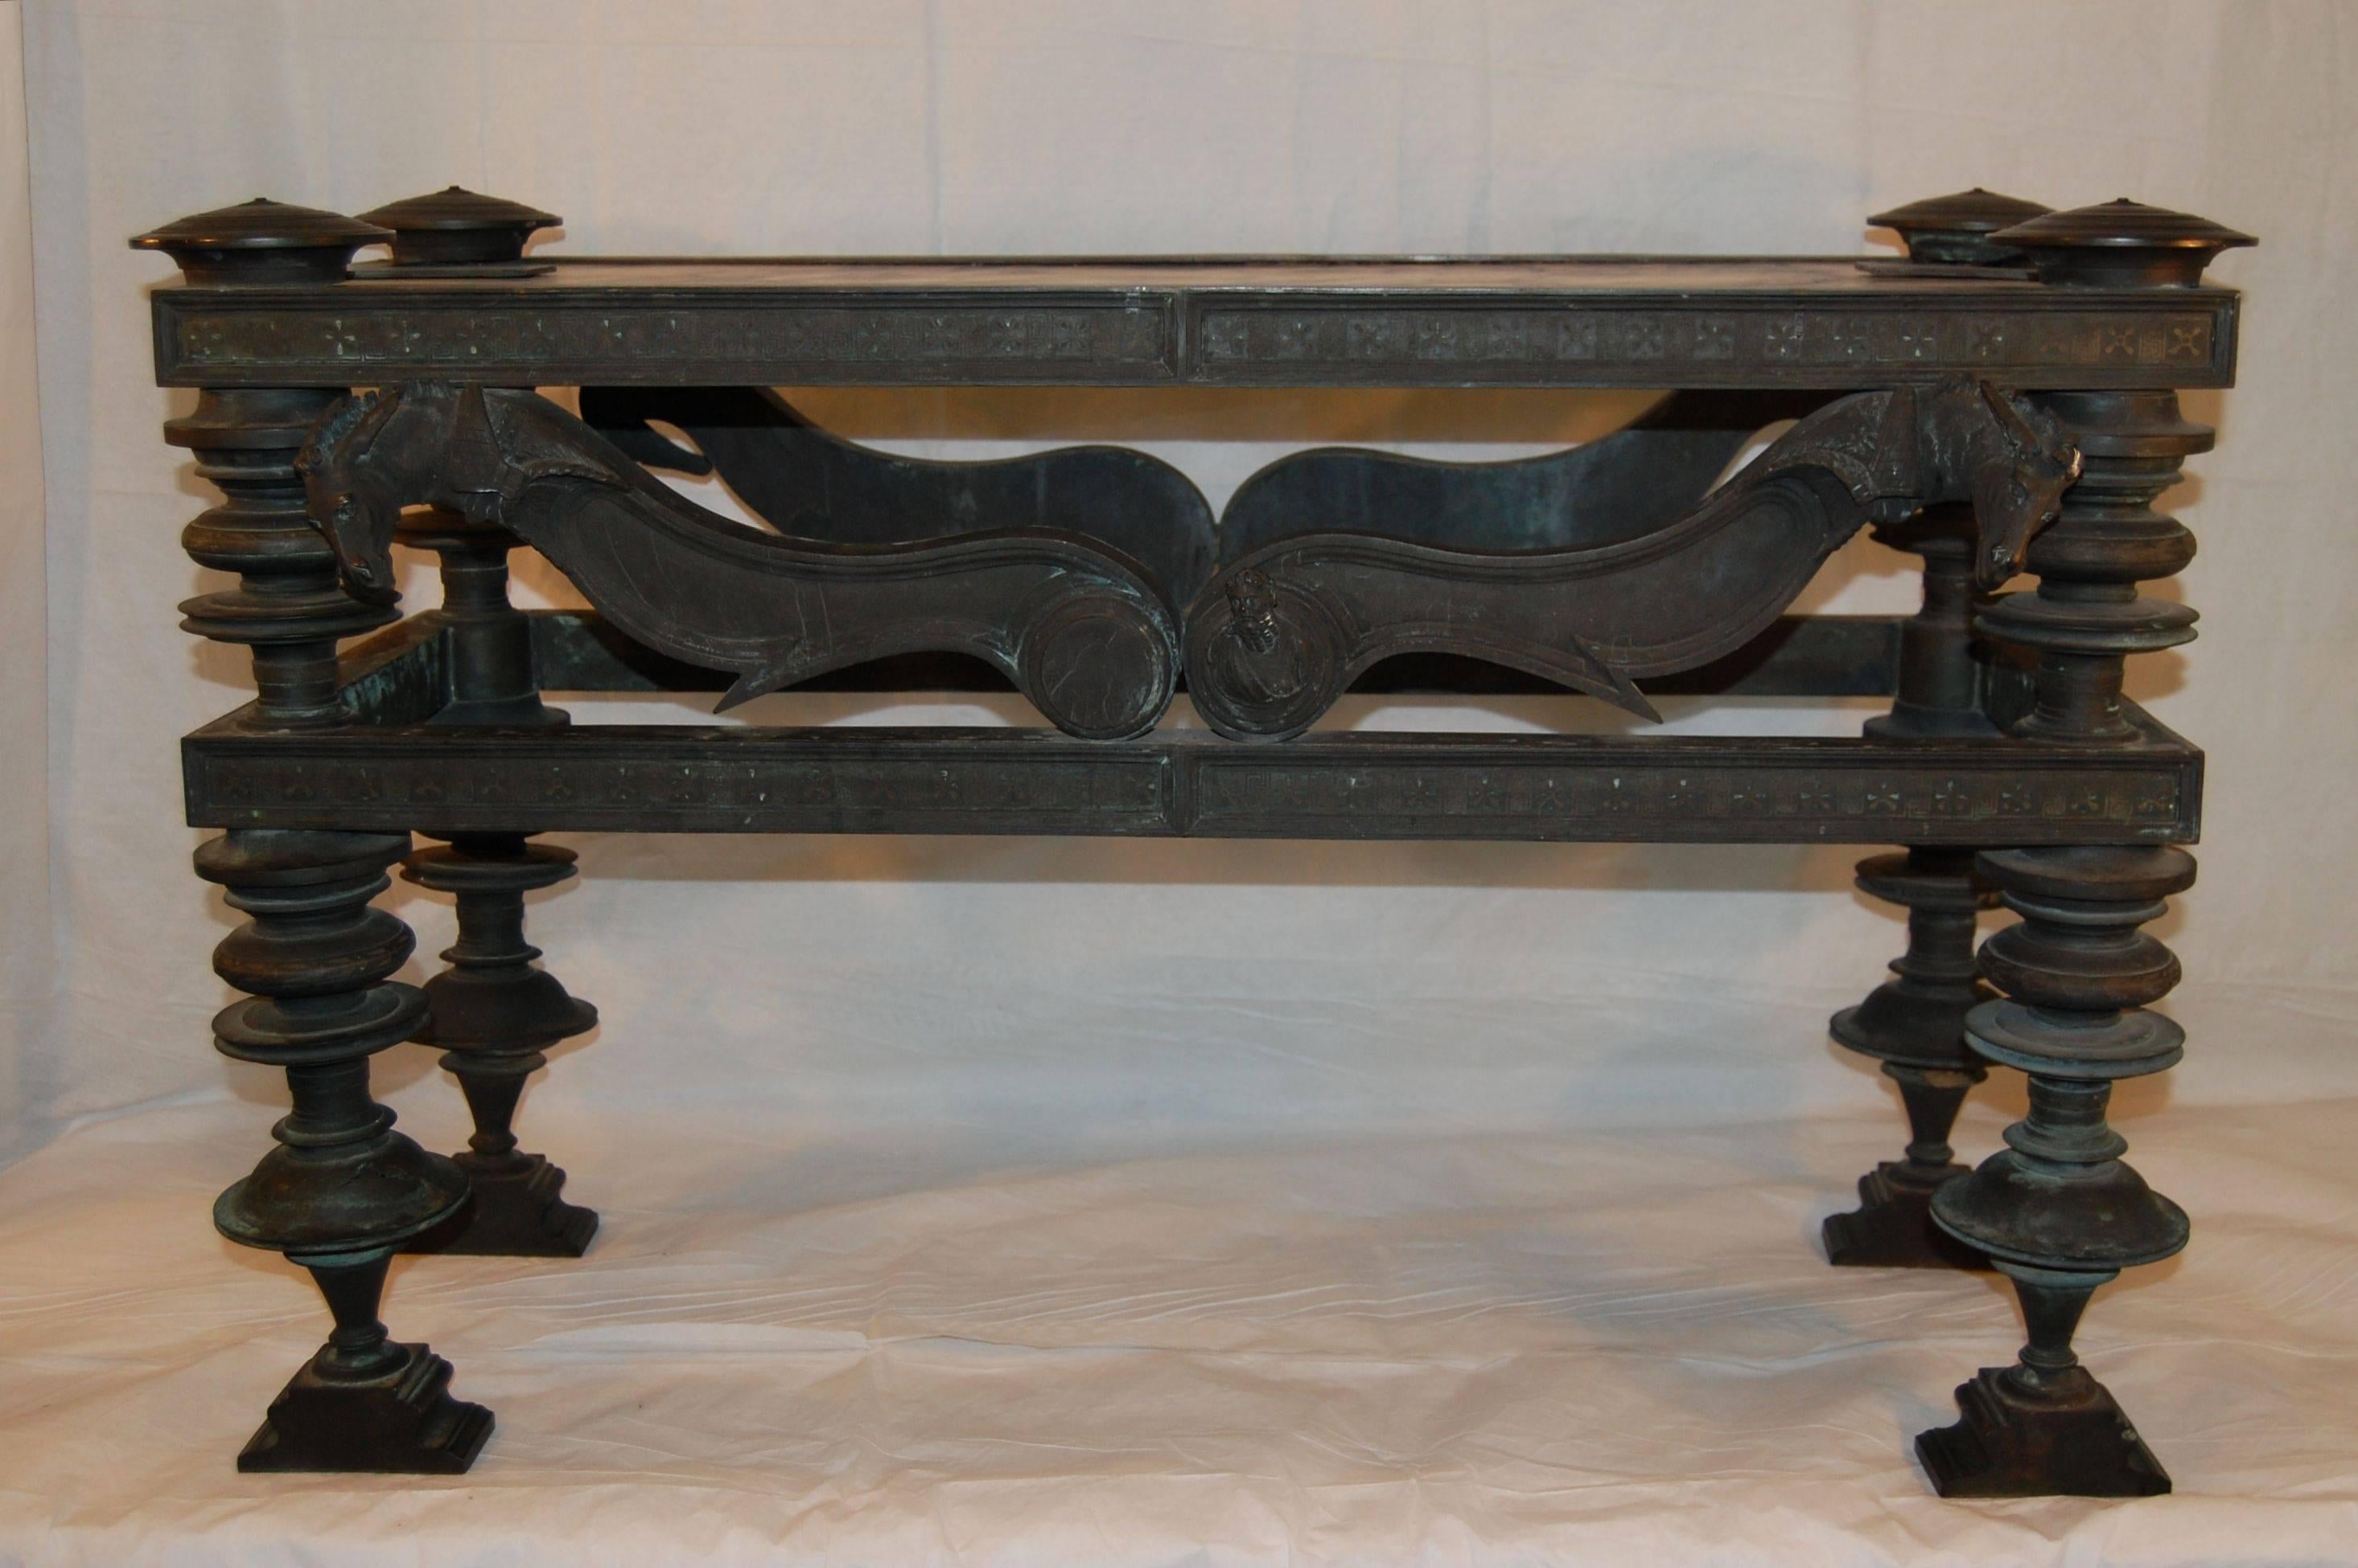 Grand Tour 19th Century Bronze and Marble 'Seat of Honor' Table by Sabatino De Angelis